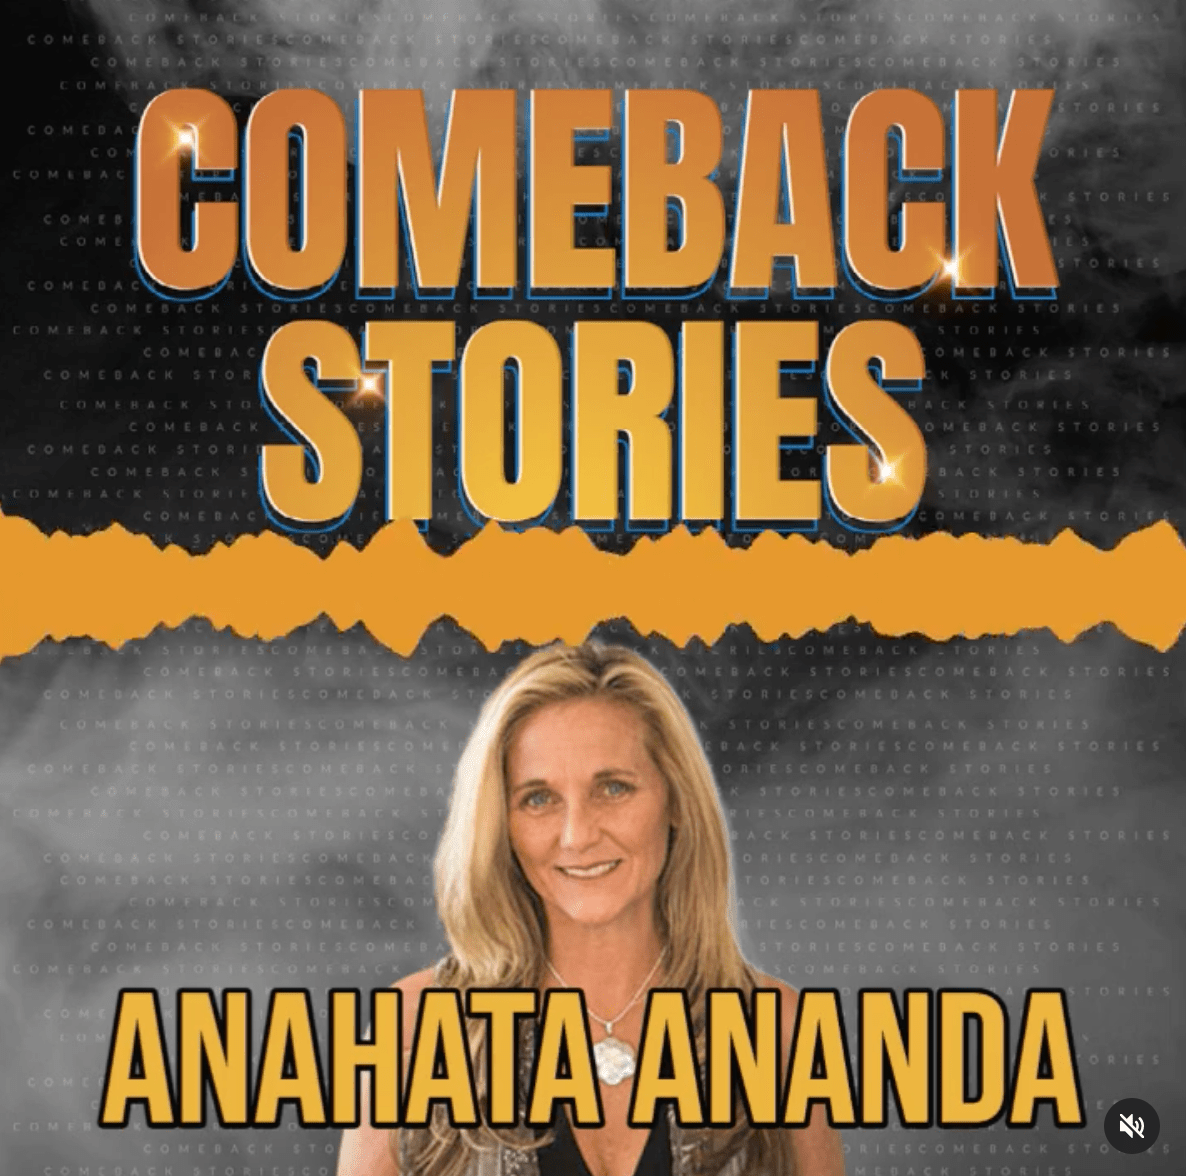 Podcast: My Comeback Story on Comeback Stories with Darren Waller & Donny Starkins